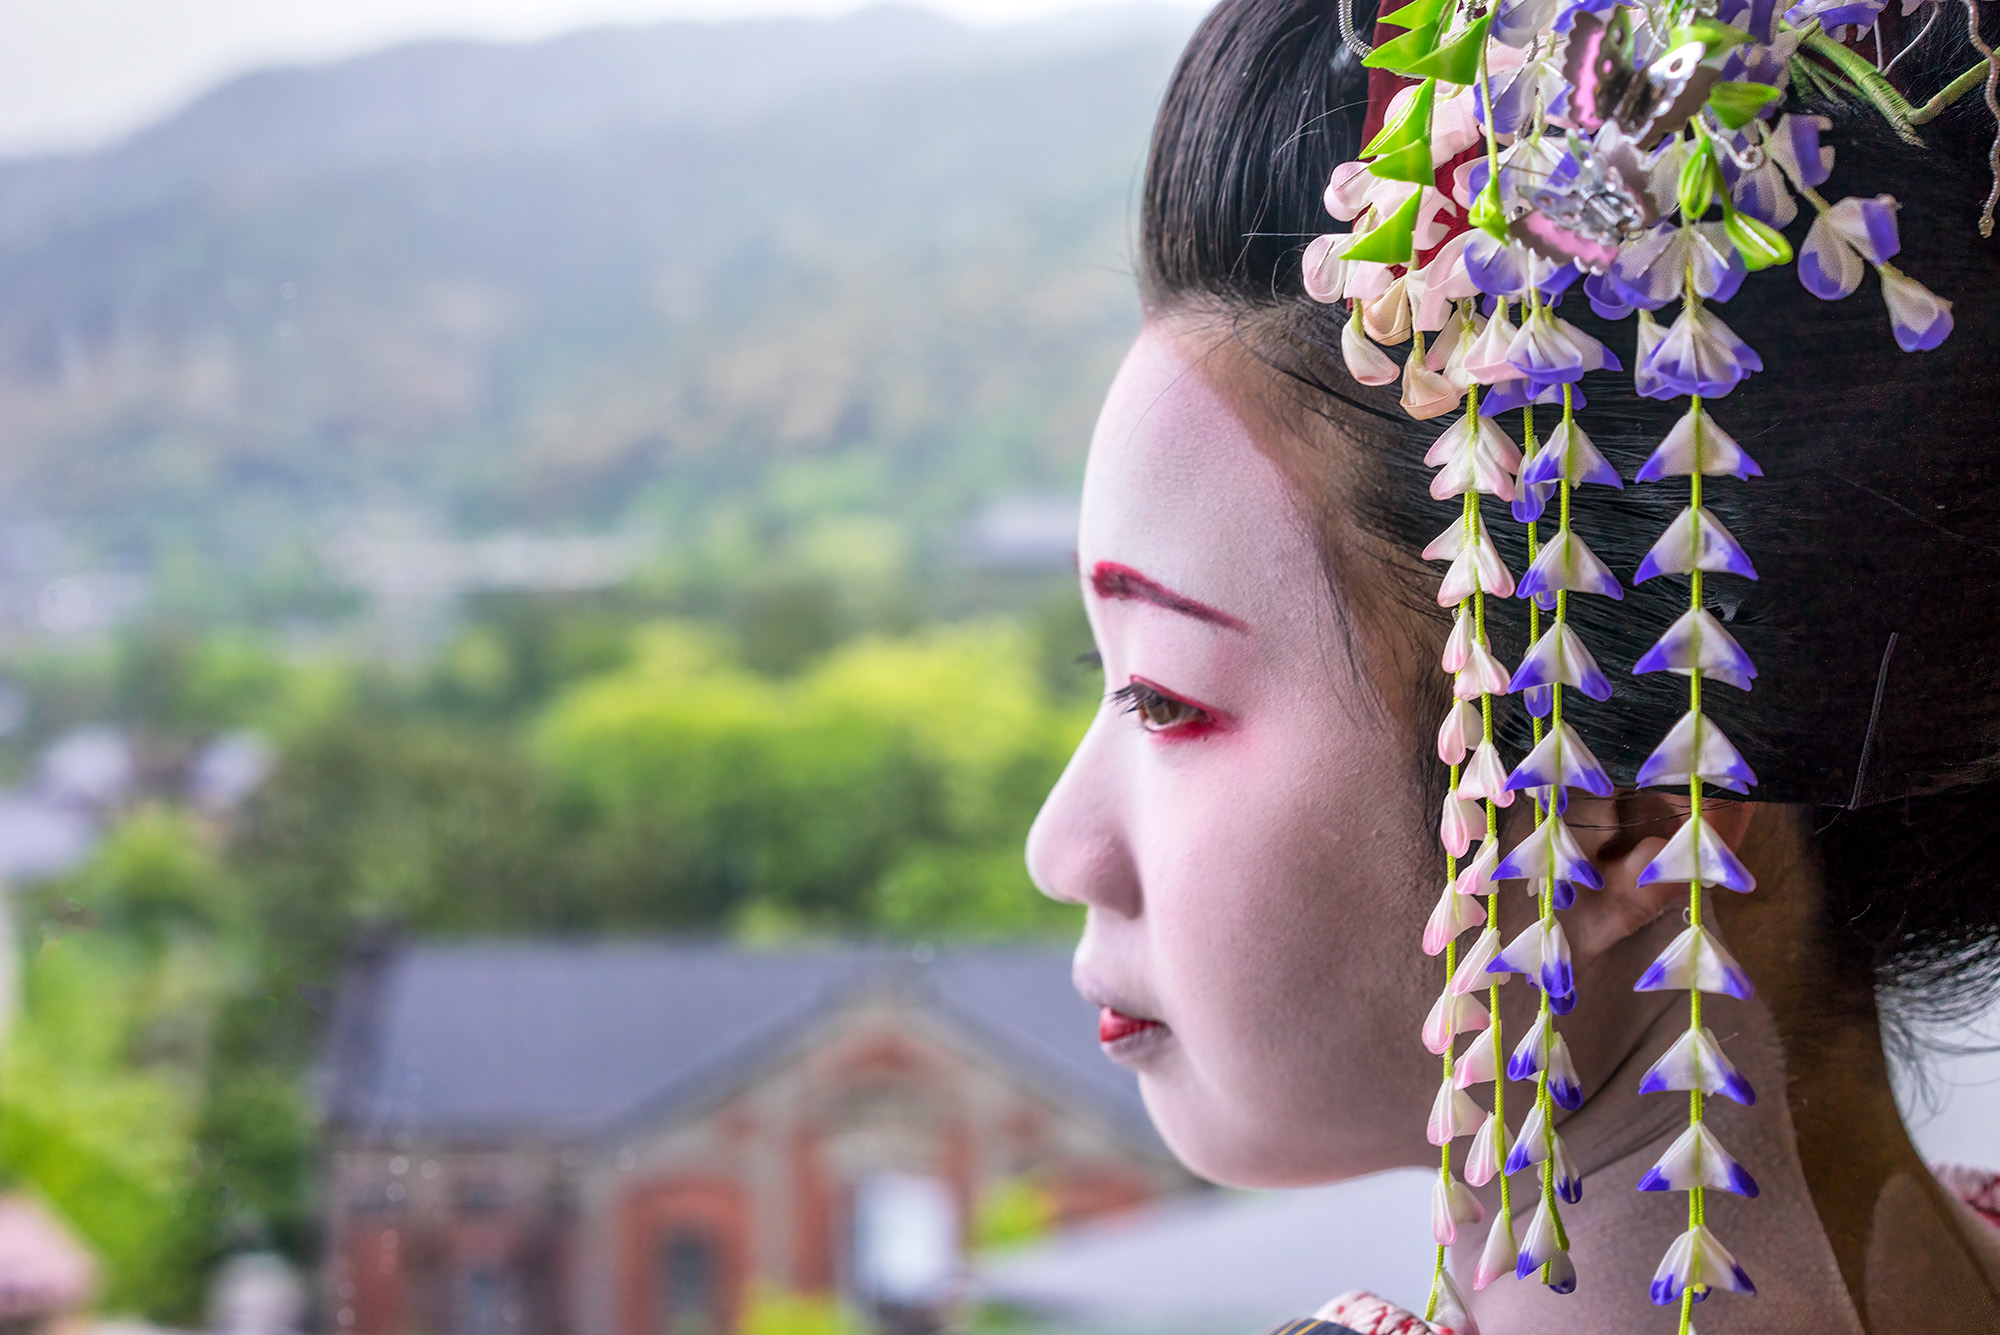 In this close-up, we peer into the intricate world of a young geisha. Her profile, adorned with meticulously arranged hair and...